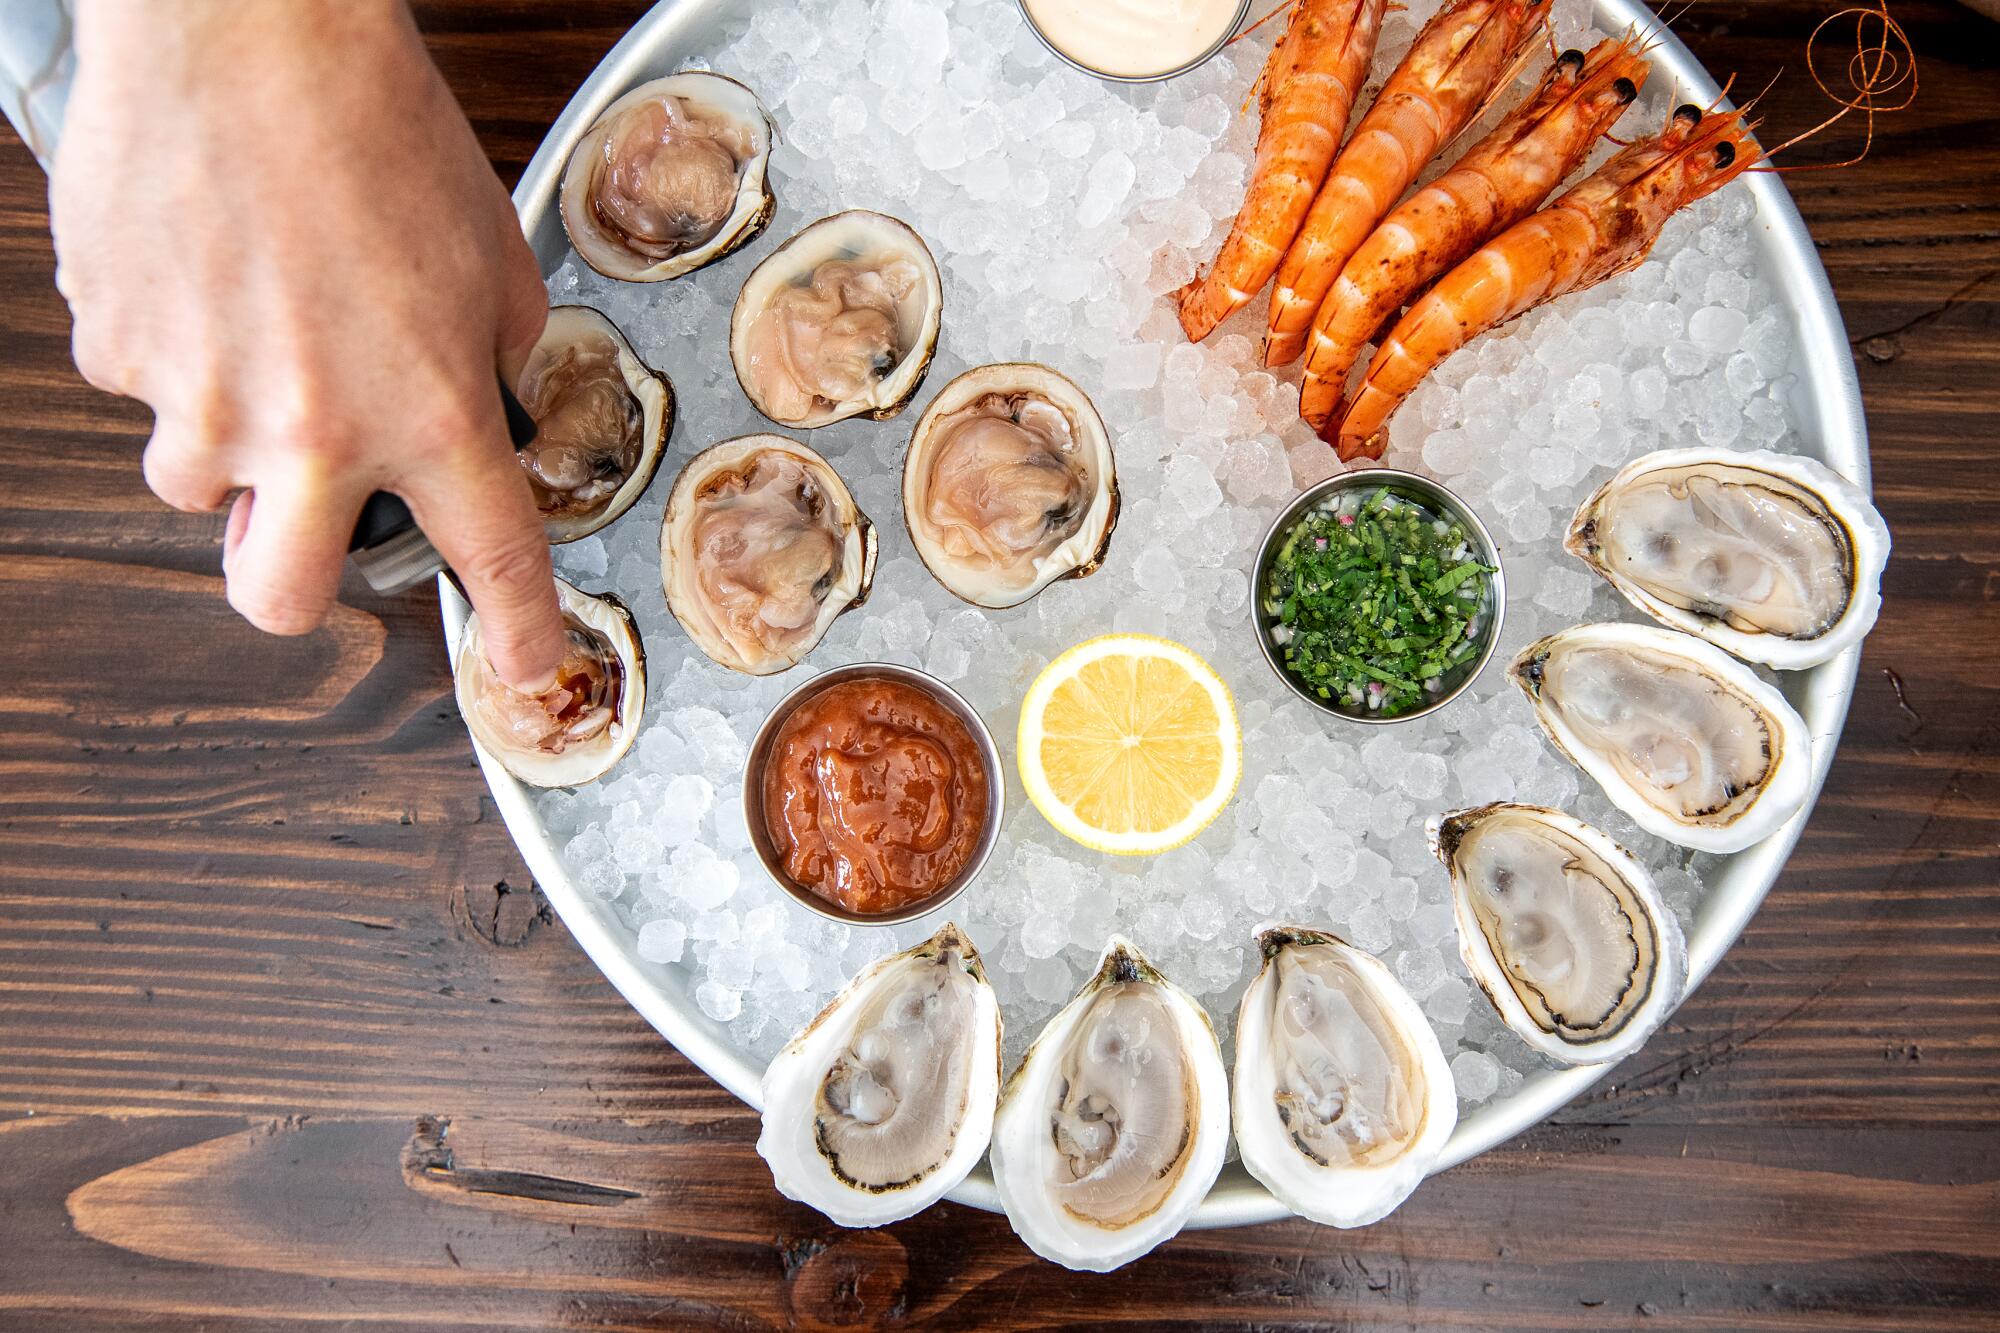 A chef's hand hovers over a tray of oysters, clams and prawns on ice.